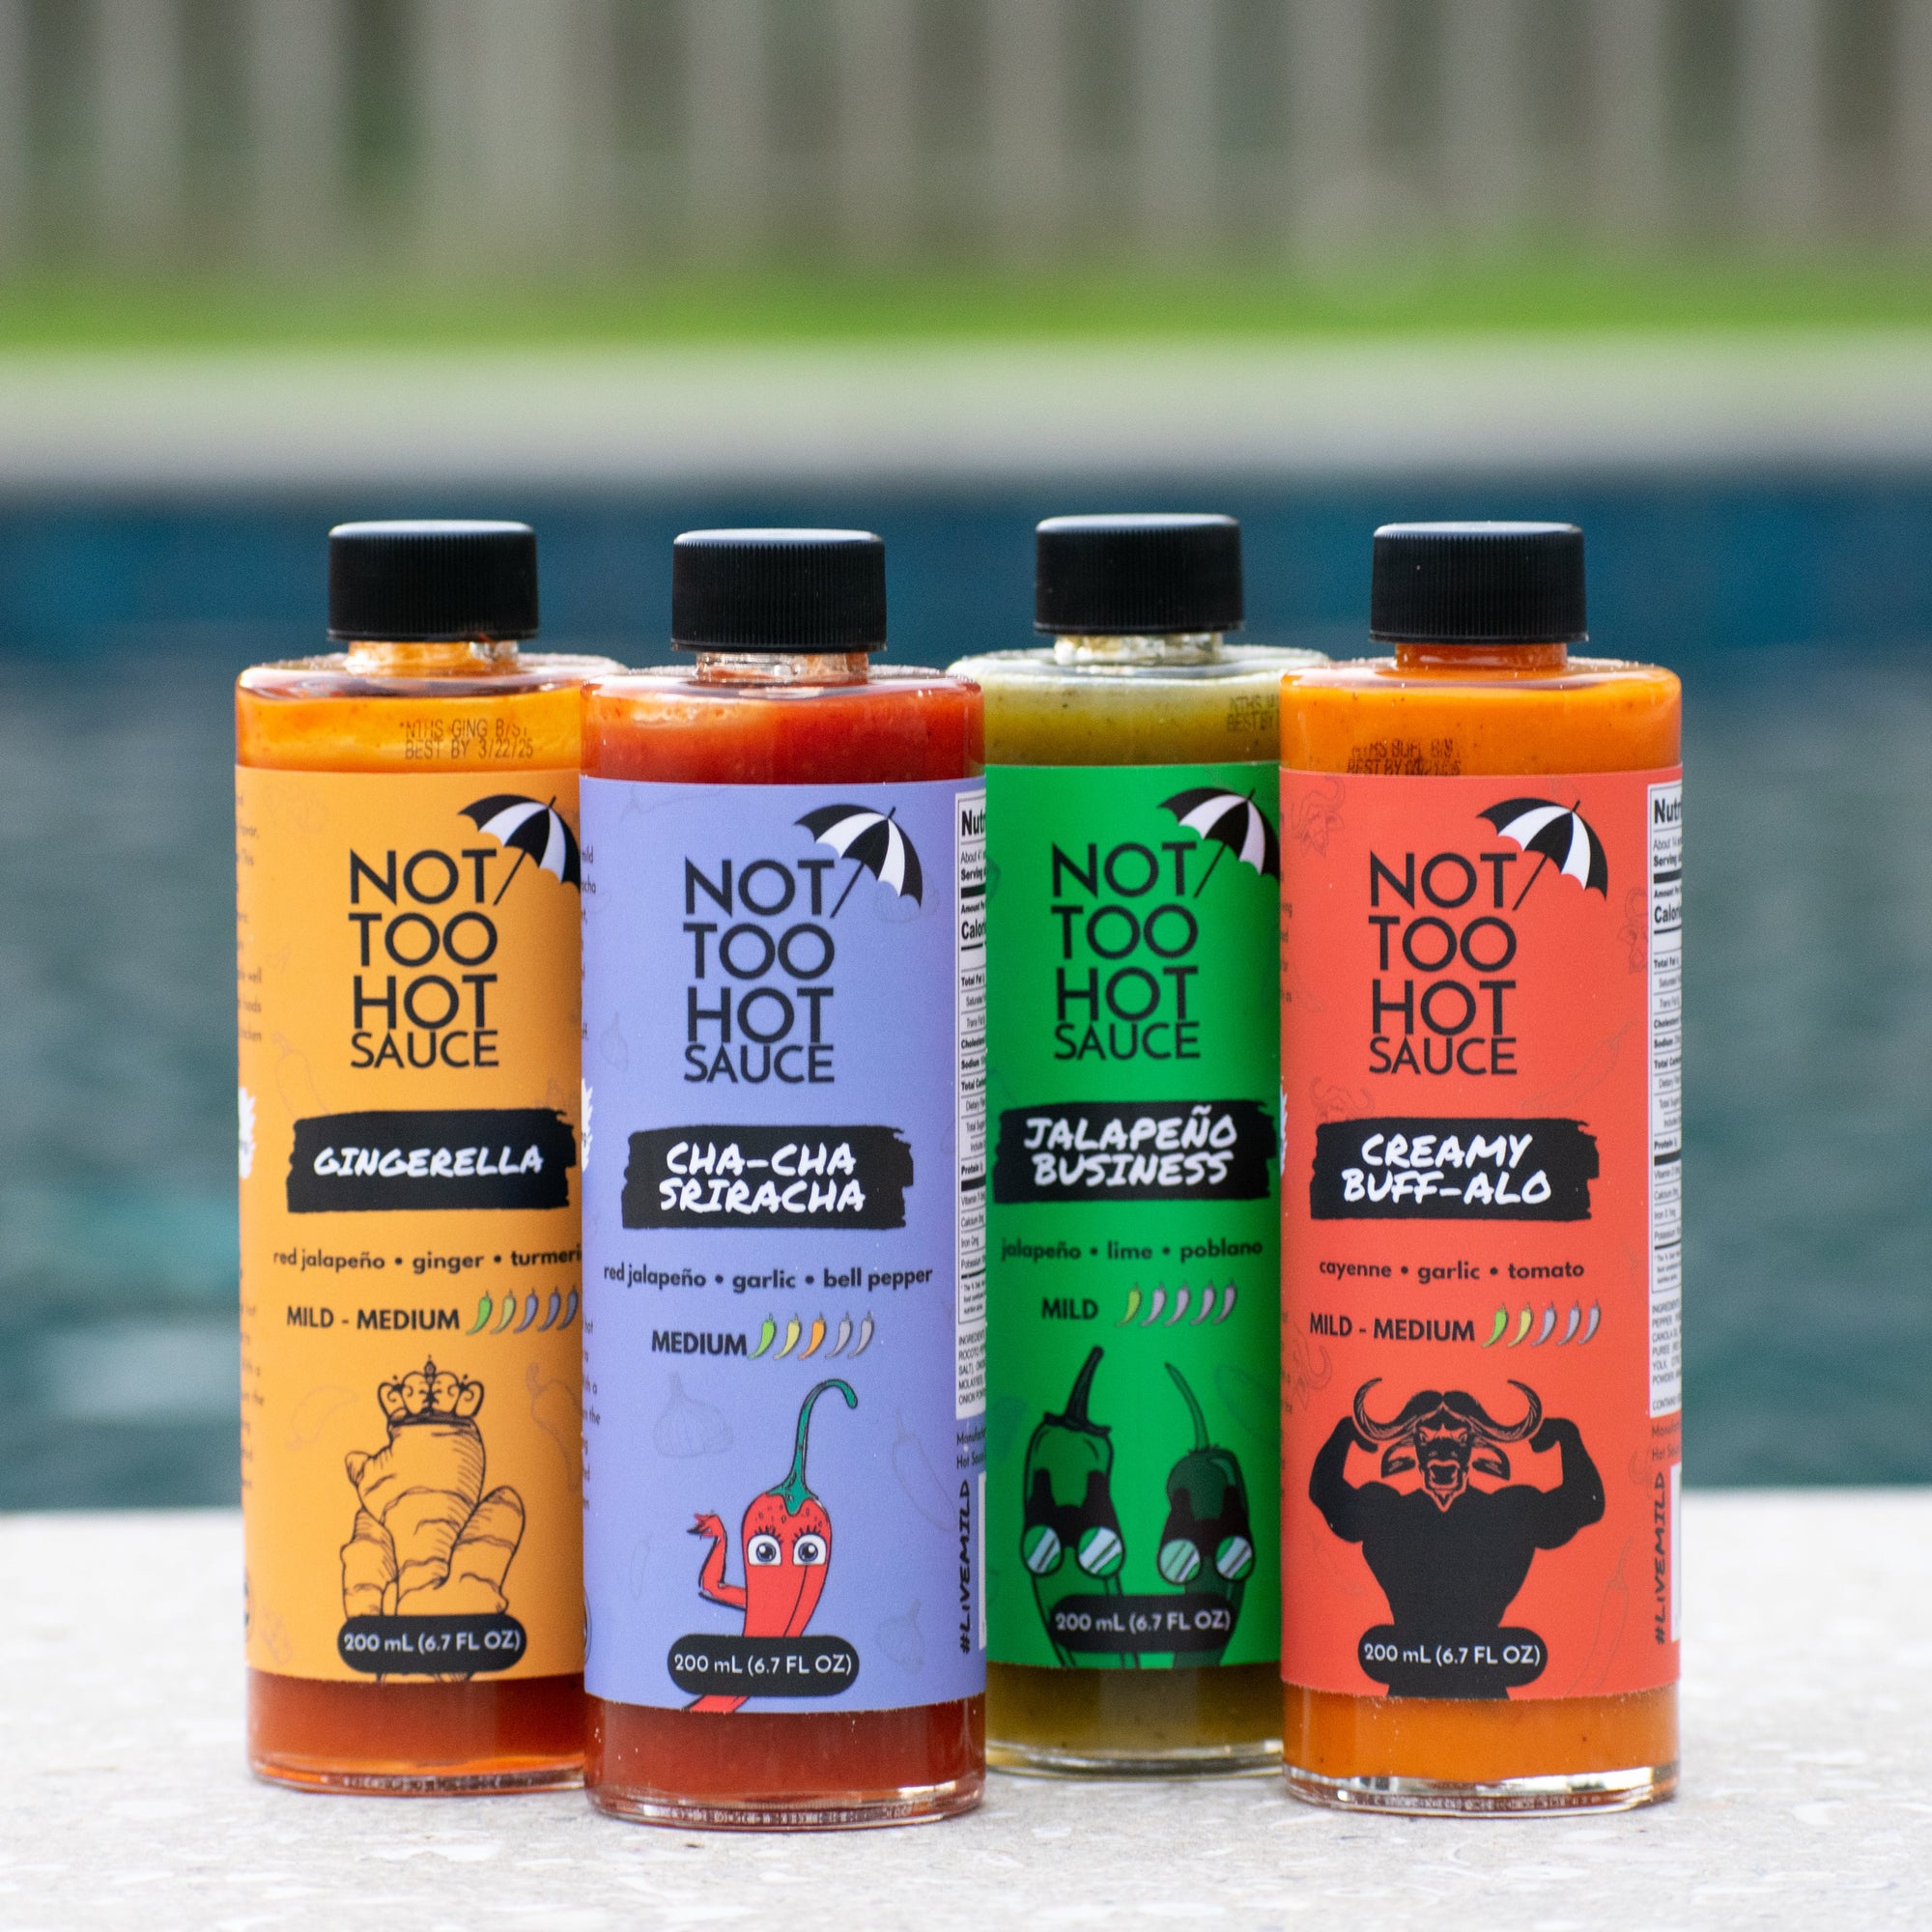 Classic Hot Sauce Variety Pack - Not Too Hot Sauce